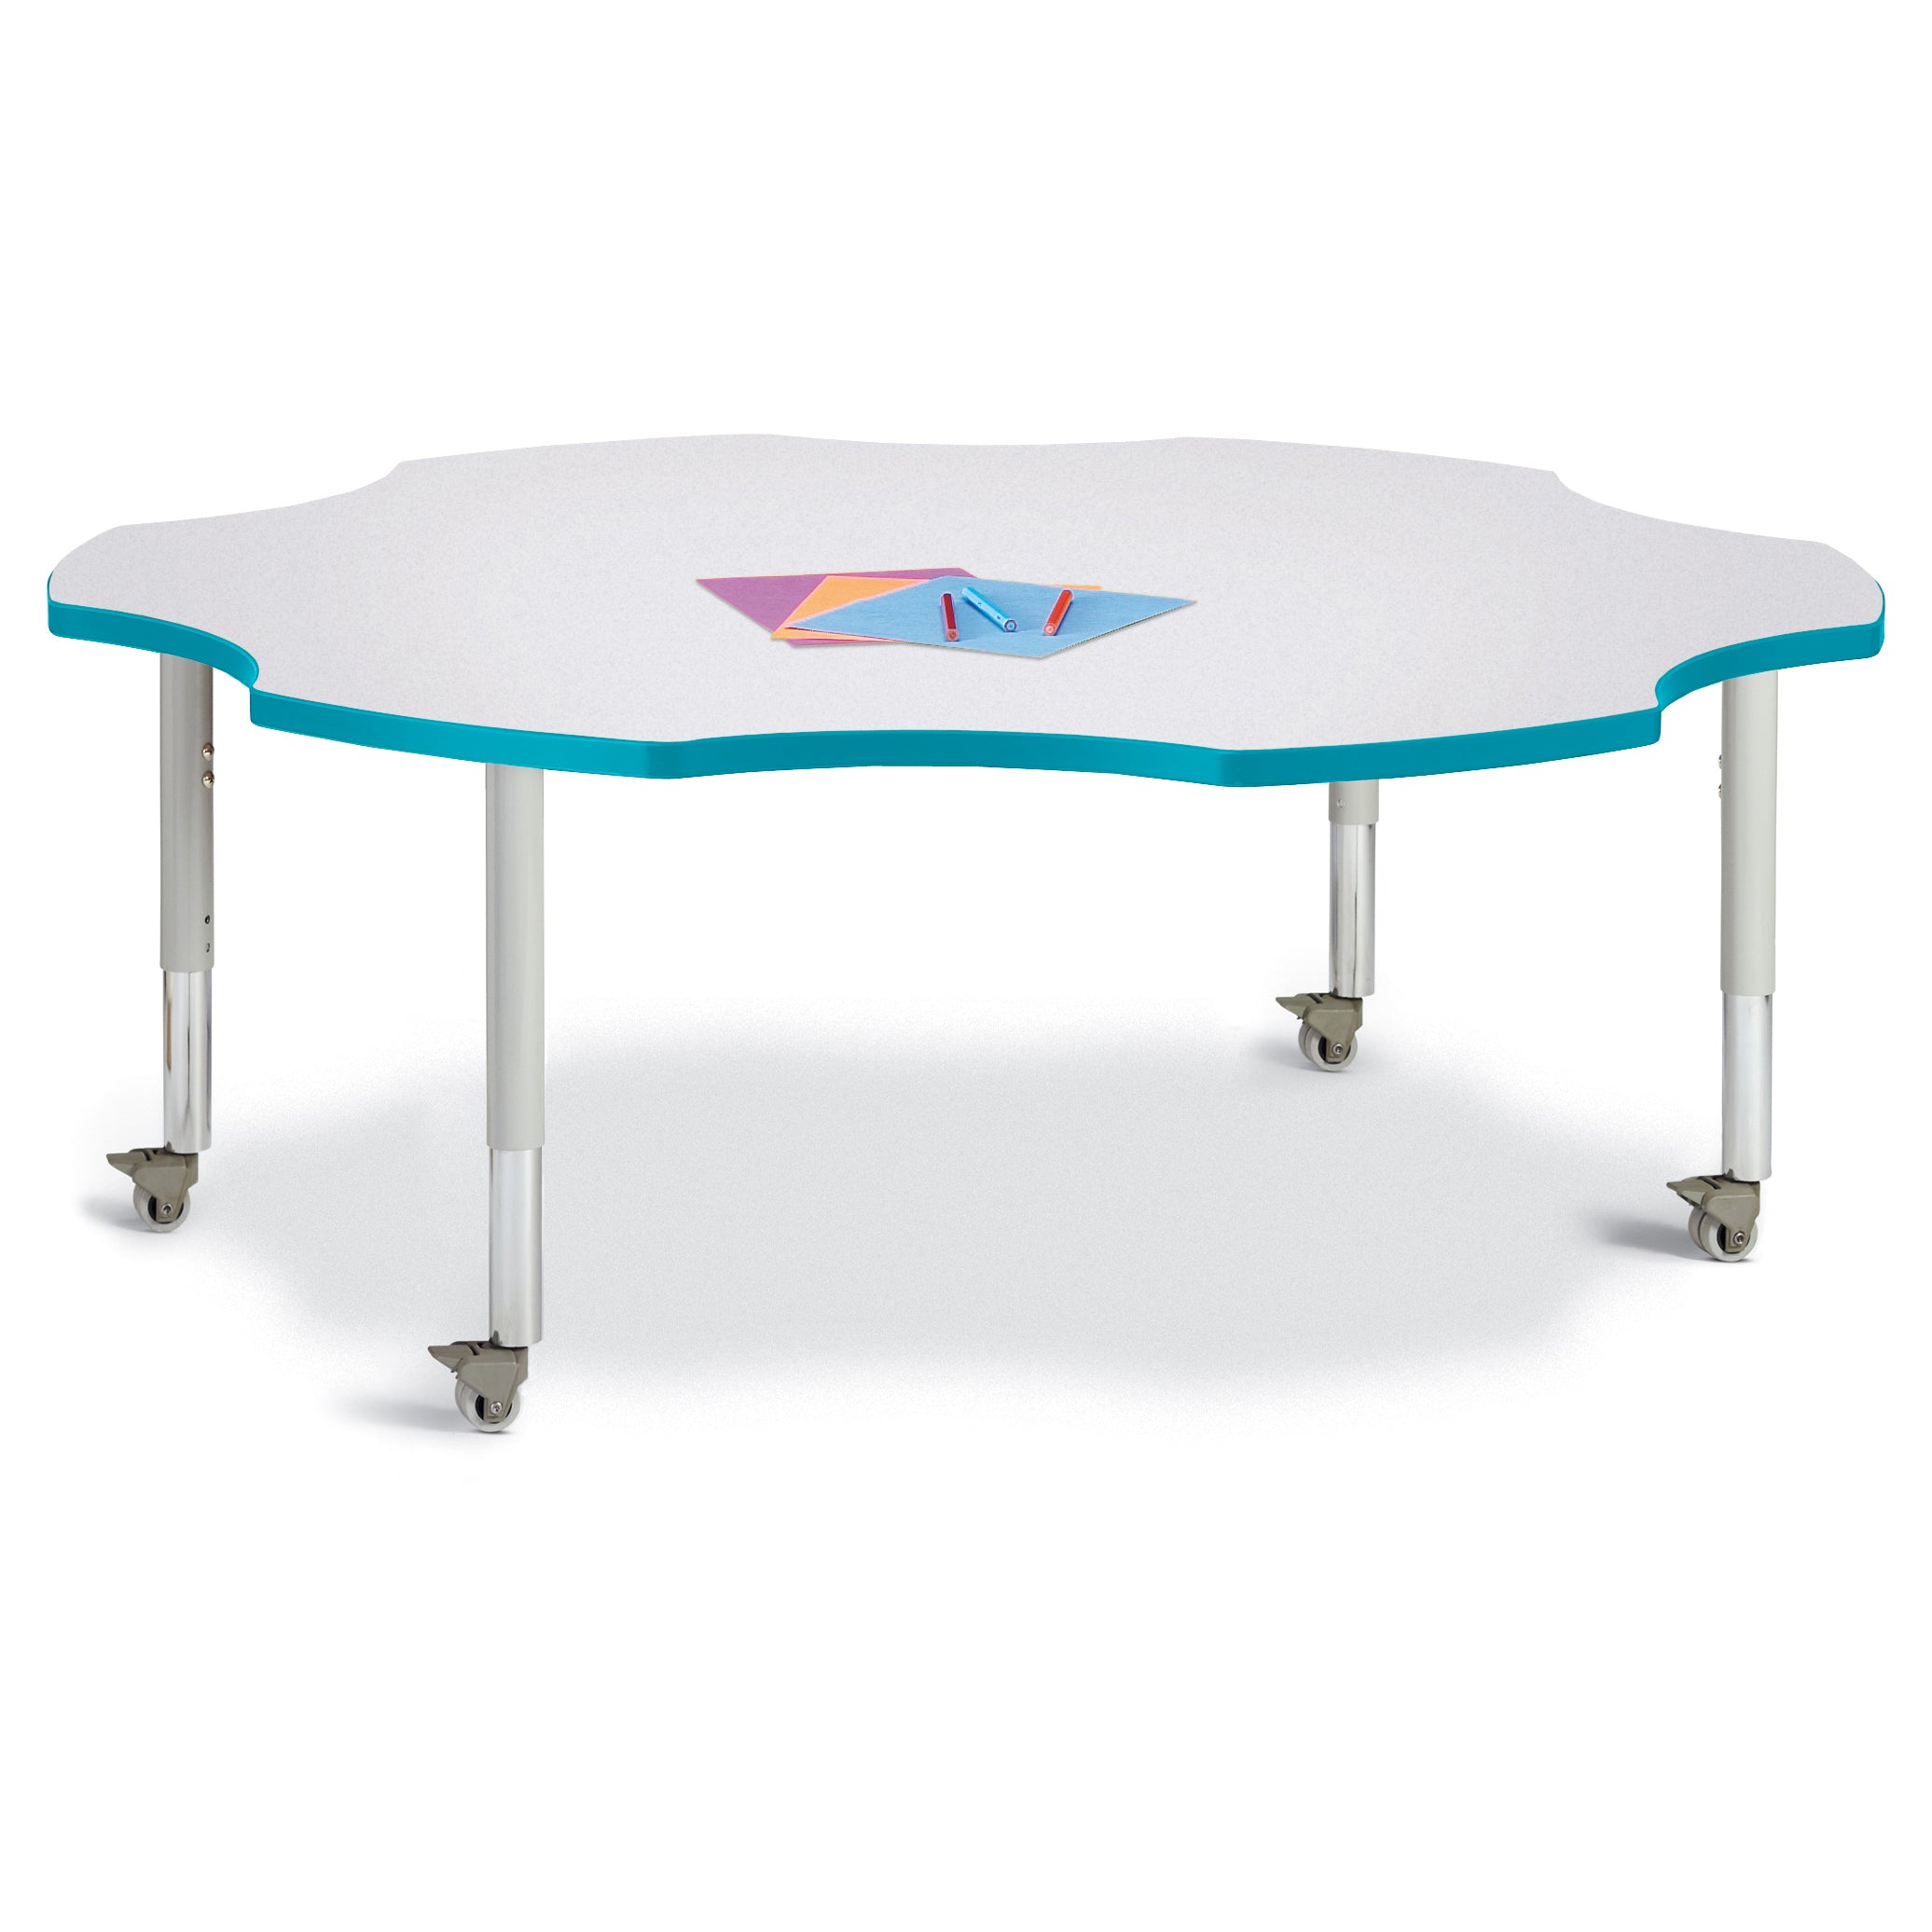 6458JCM005, Berries Six Leaf Activity Table - 60", Mobile - Freckled Gray/Teal/Gray